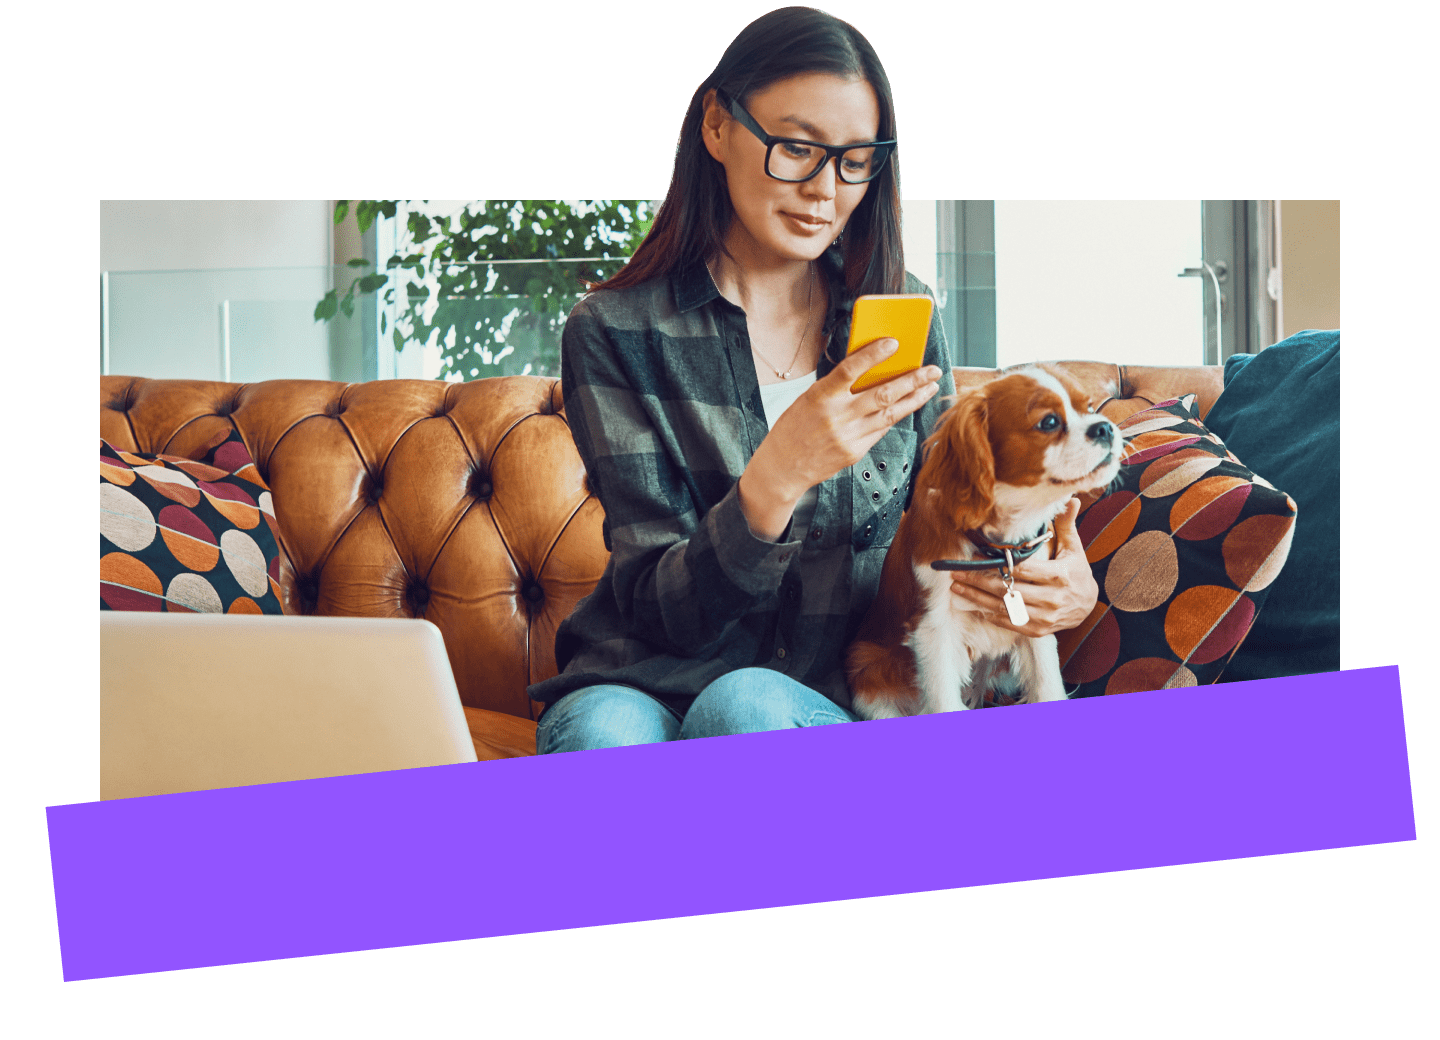 Remote employee securely using a mobile device to conduct business while working from home with their dog.